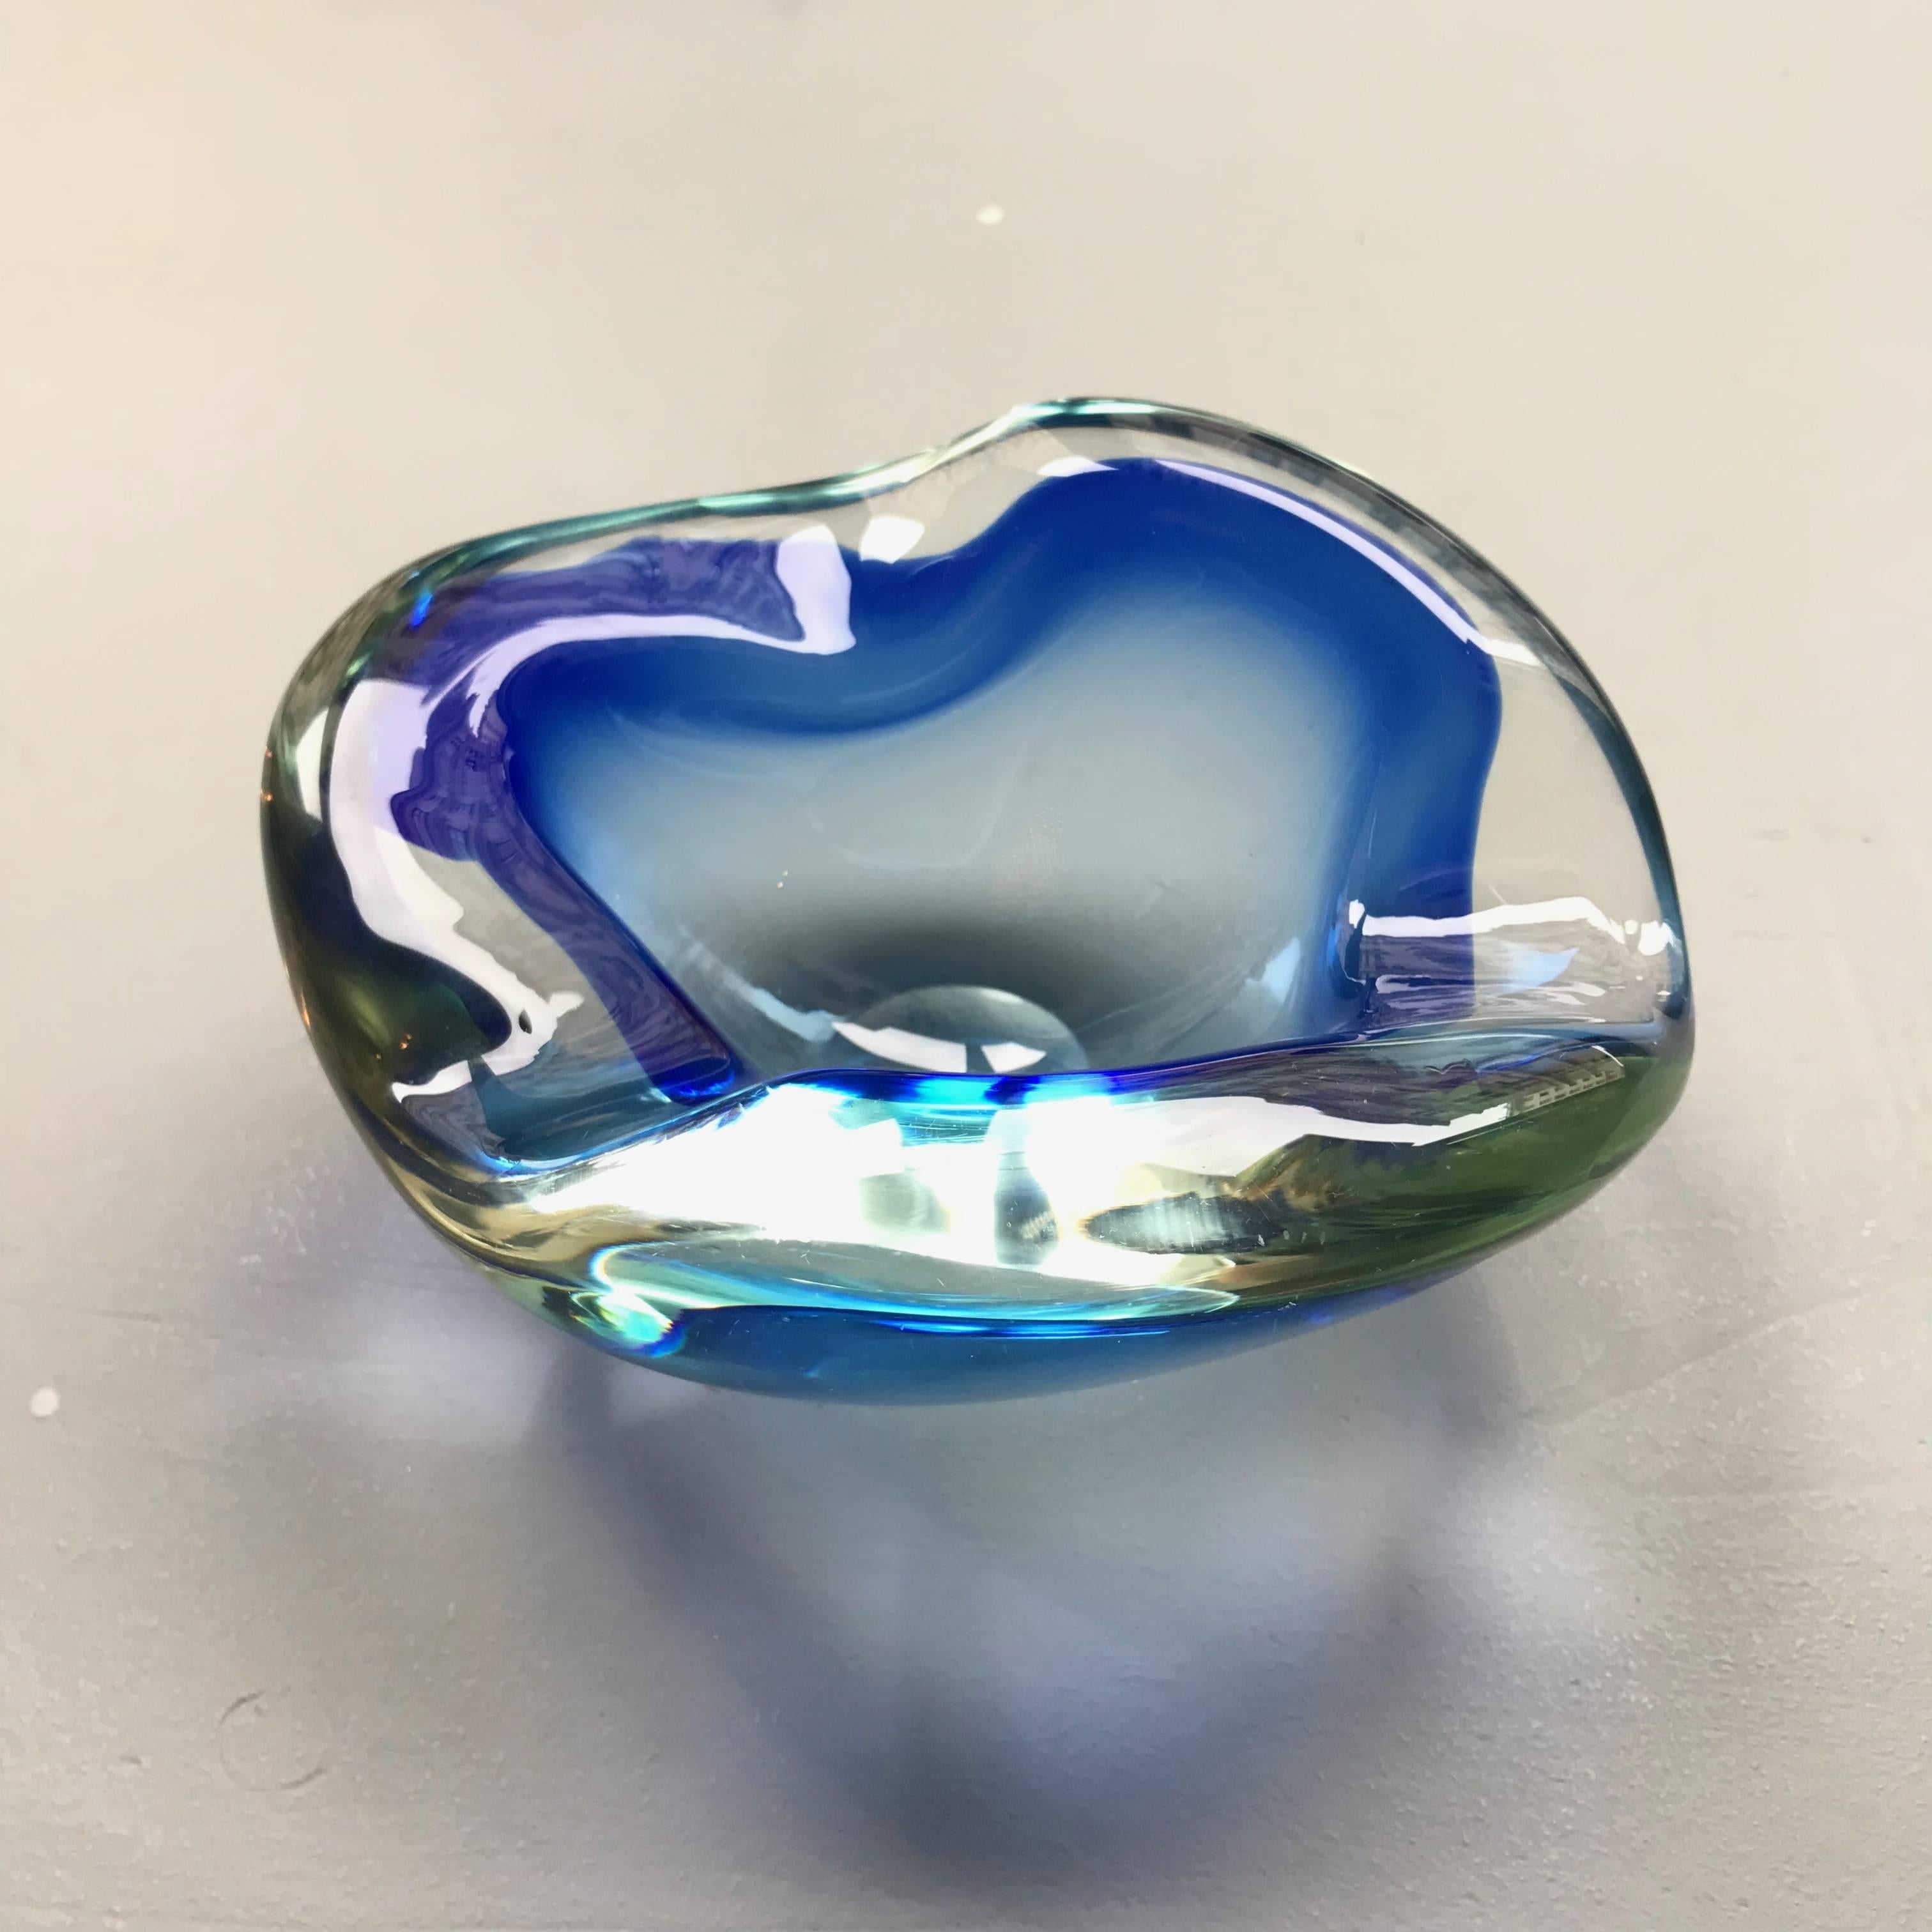 Unique cobalt blue blown Murano glass bowl with three folded edges. The bowl was handblown of heavy thick-walled glass, with fire polished rims by Murano Art Glass in 1950s.

Measurements: L 17 x D 15 x H 8 cm. / L 6.7 x D 6 x H 3.1 in.